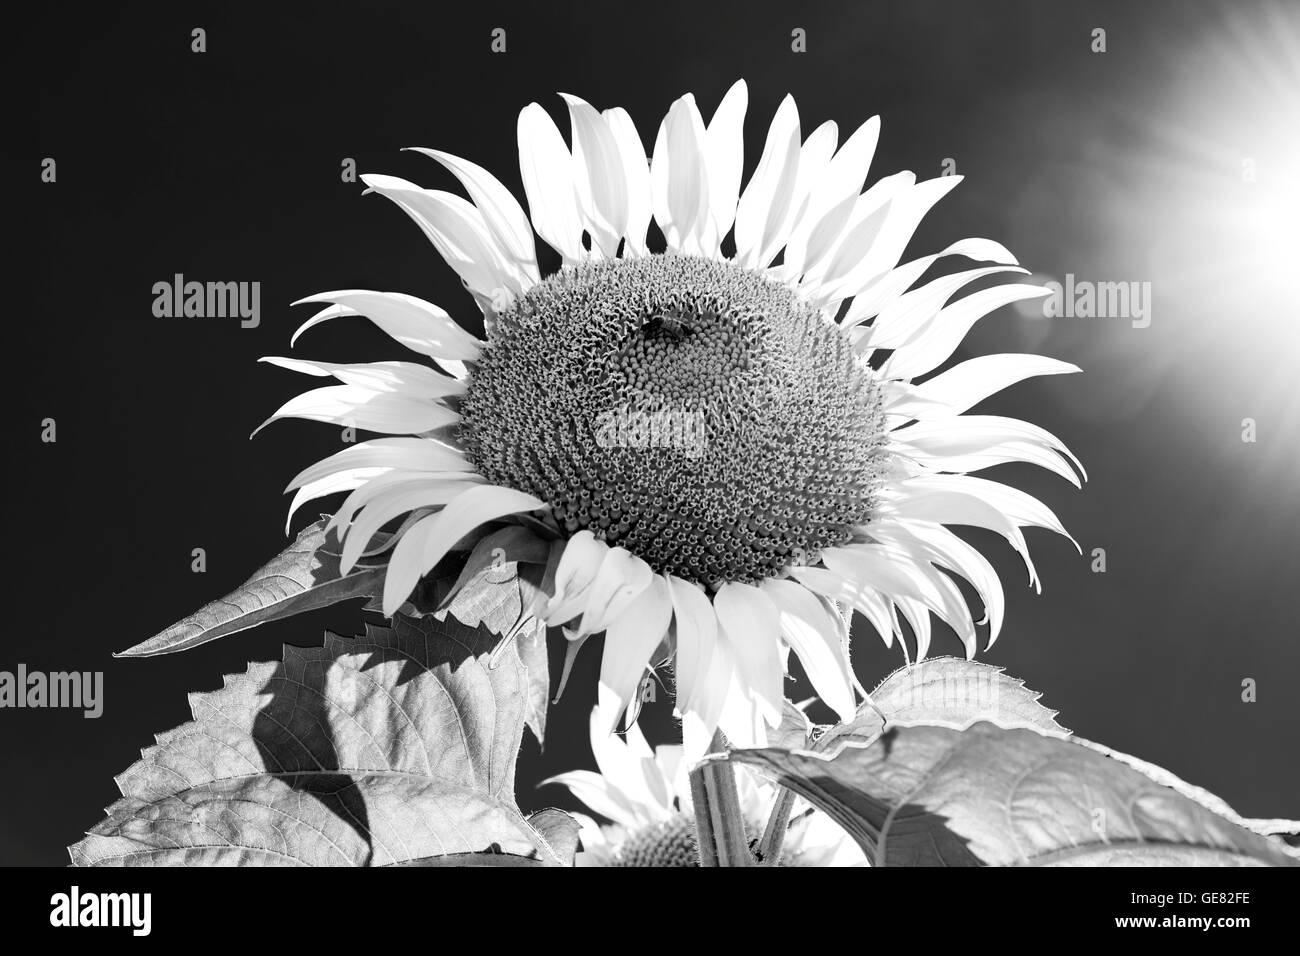 Sunflower field in summer black and white, Italy Umbria Stock Photo